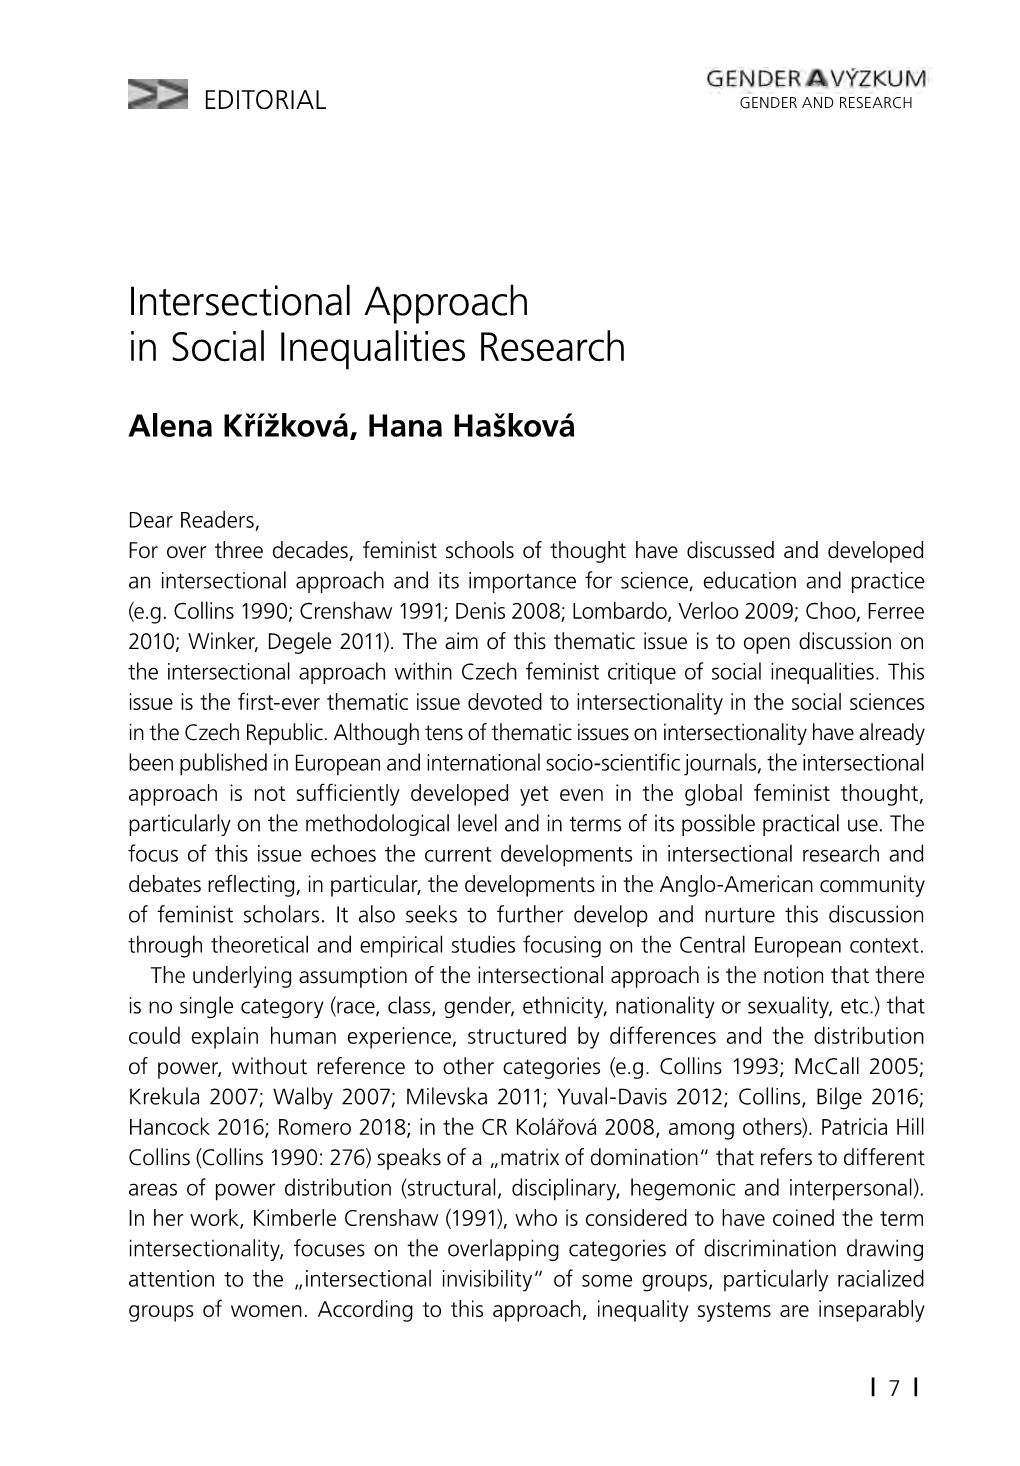 Intersectional Approach in Social Inequalities Research